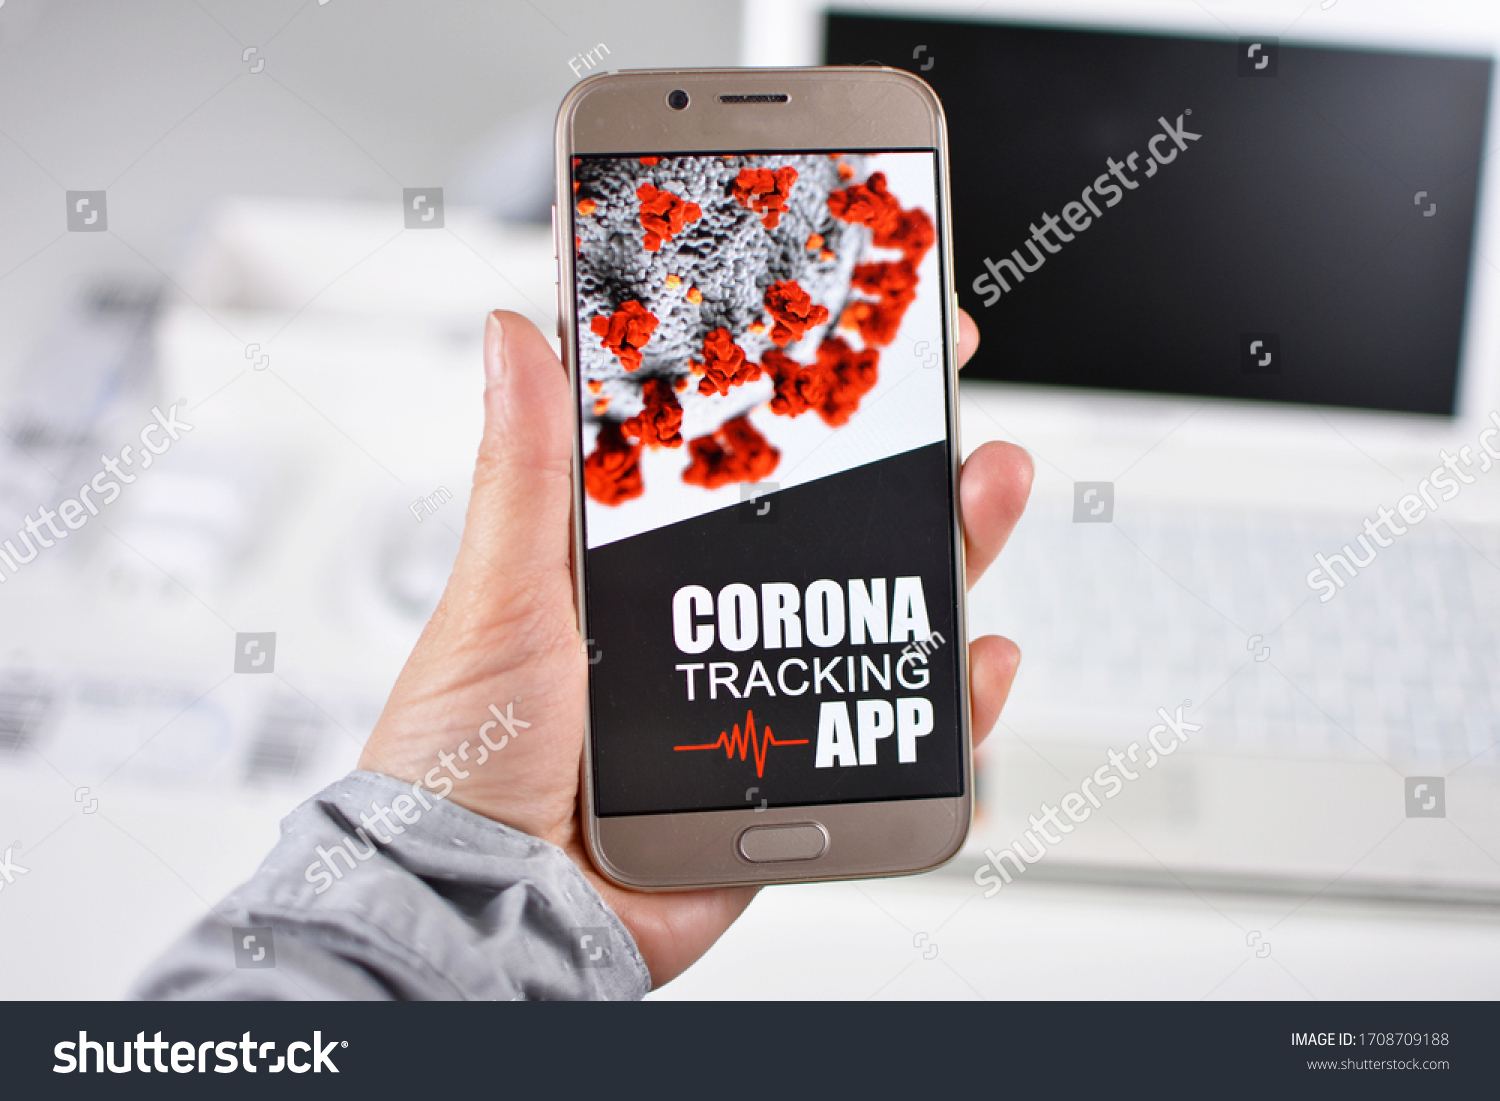 Corona Virus Tracking App concept with hand holding cell phone with application design on screen in front of blurry office background #1708709188